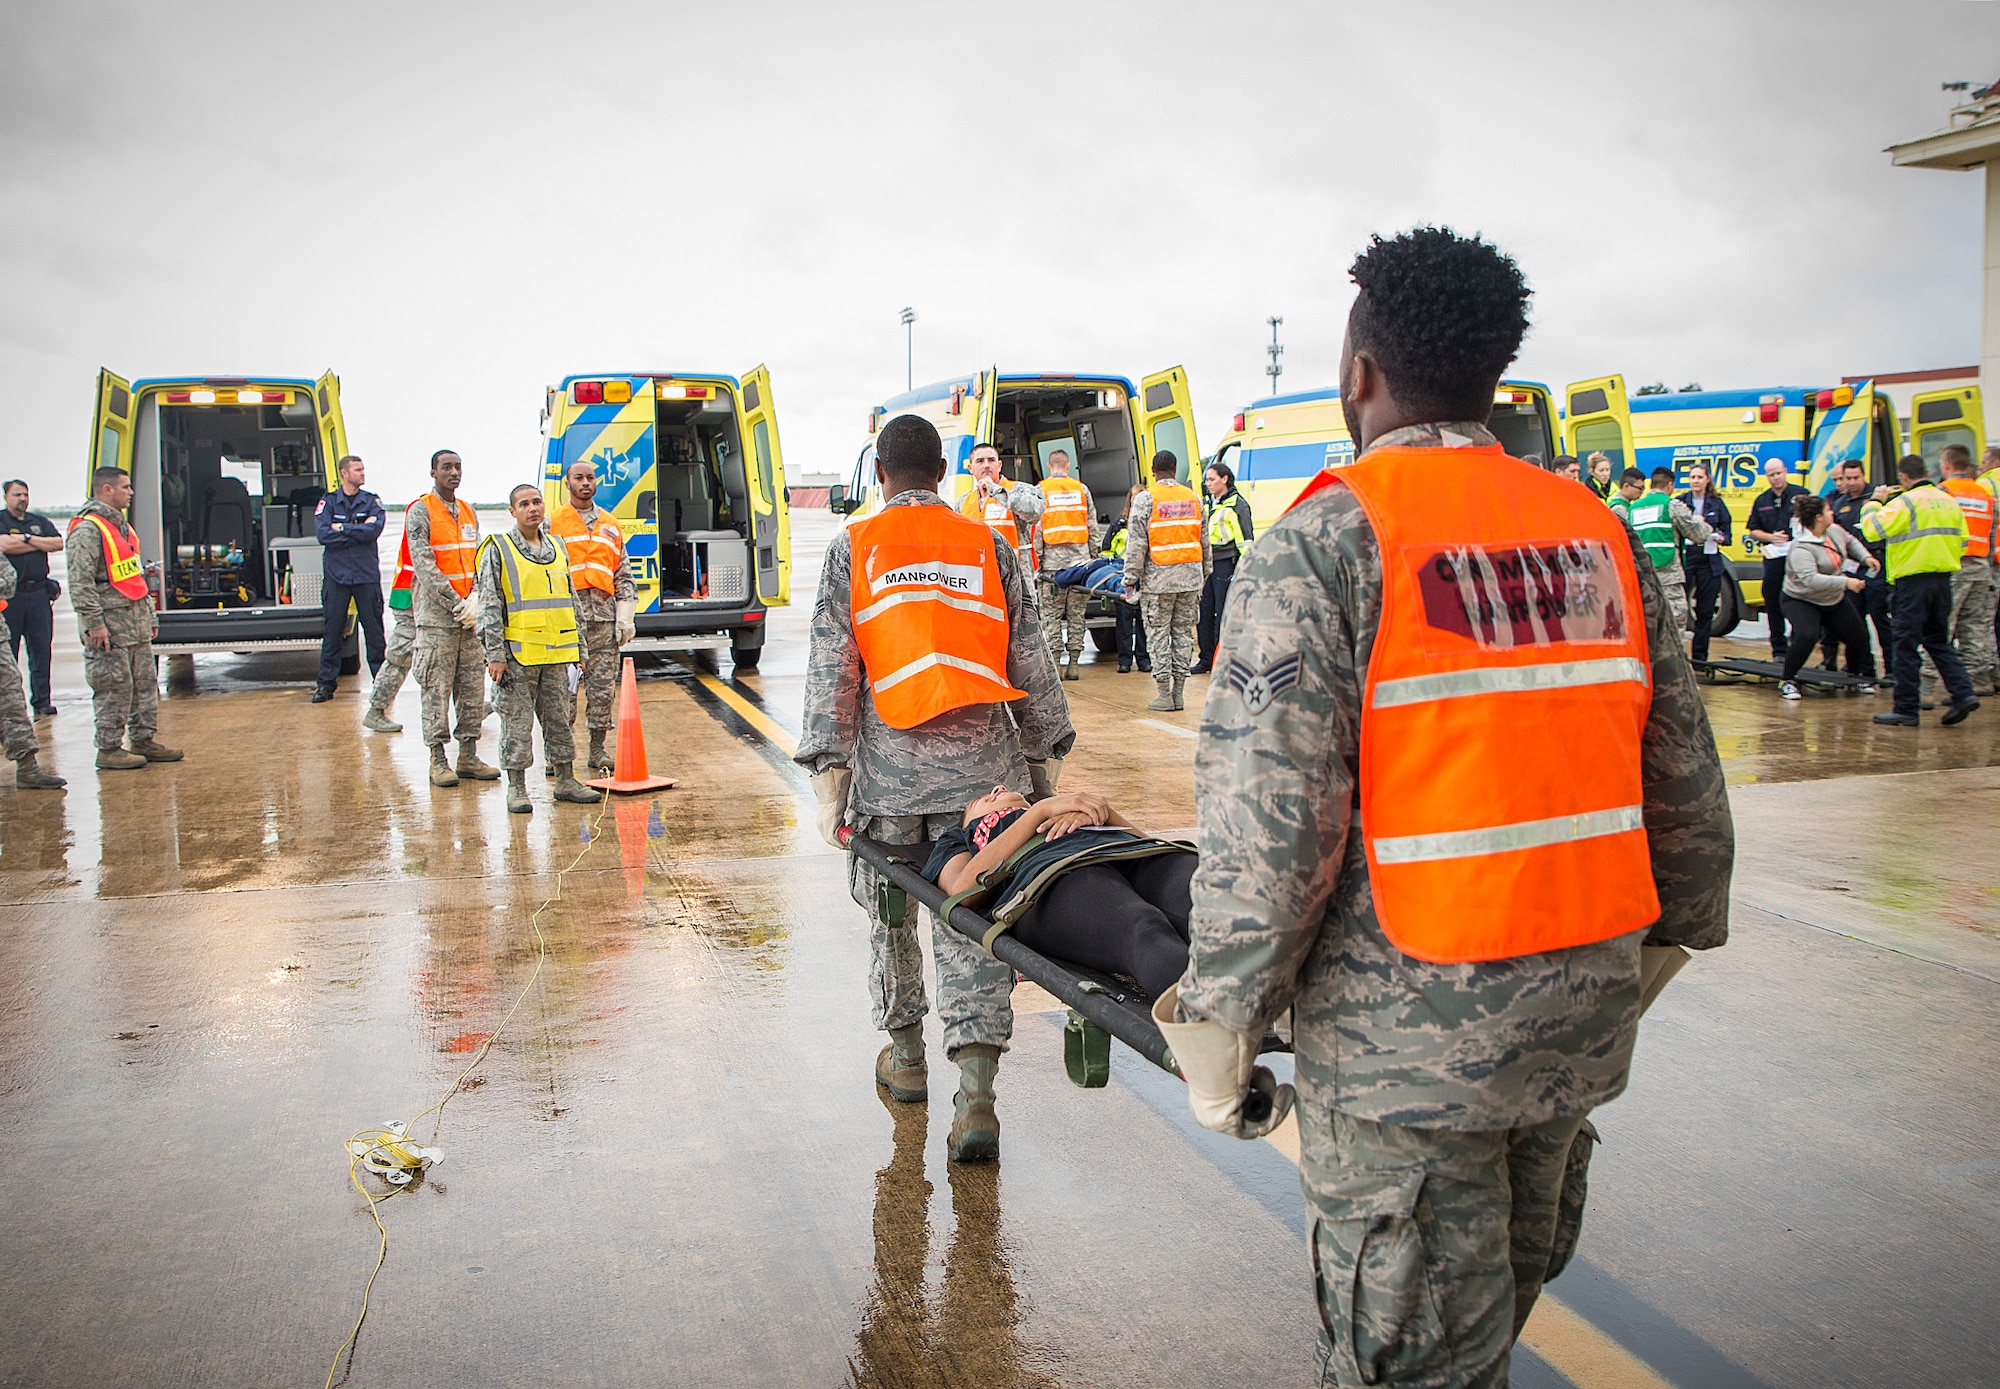 Airmen with the 433rd Aeromedical Evacuation Squadron move littered patients to waiting ambulances during a natural disaster exercise Nov. 9, 2016 at Joint Base San Antonio-Lackland, Texas. The exercise allowed the South Texas Regional Advisory Council to meet its annual requirement to test its ability to evacuate patients with regional Emergency Medical Service departments. (U.S. Air Force photo by Benjamin Faske)